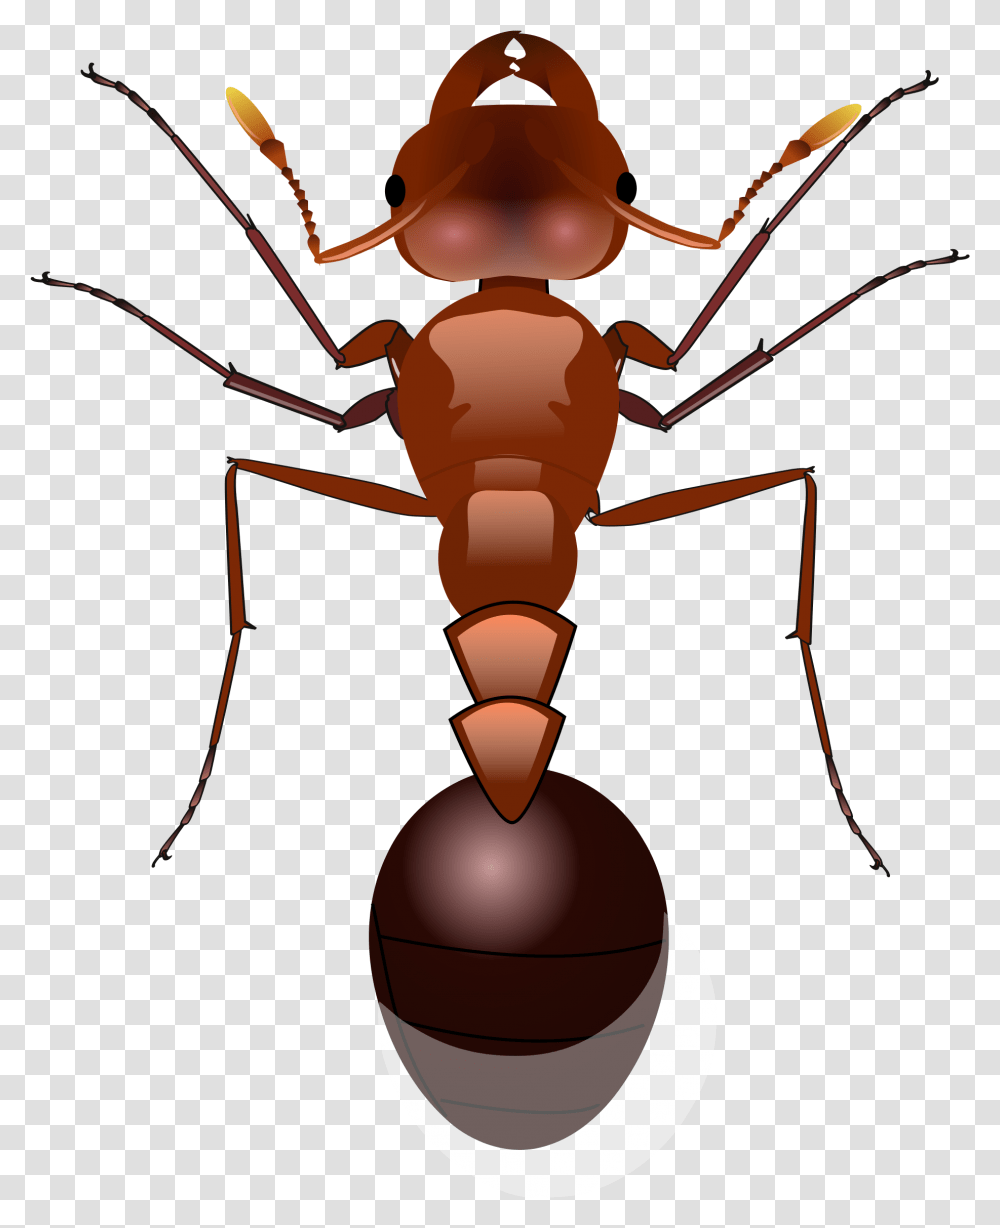 Download Ants Image For Free Ants, Lamp, Insect, Invertebrate, Animal Transparent Png